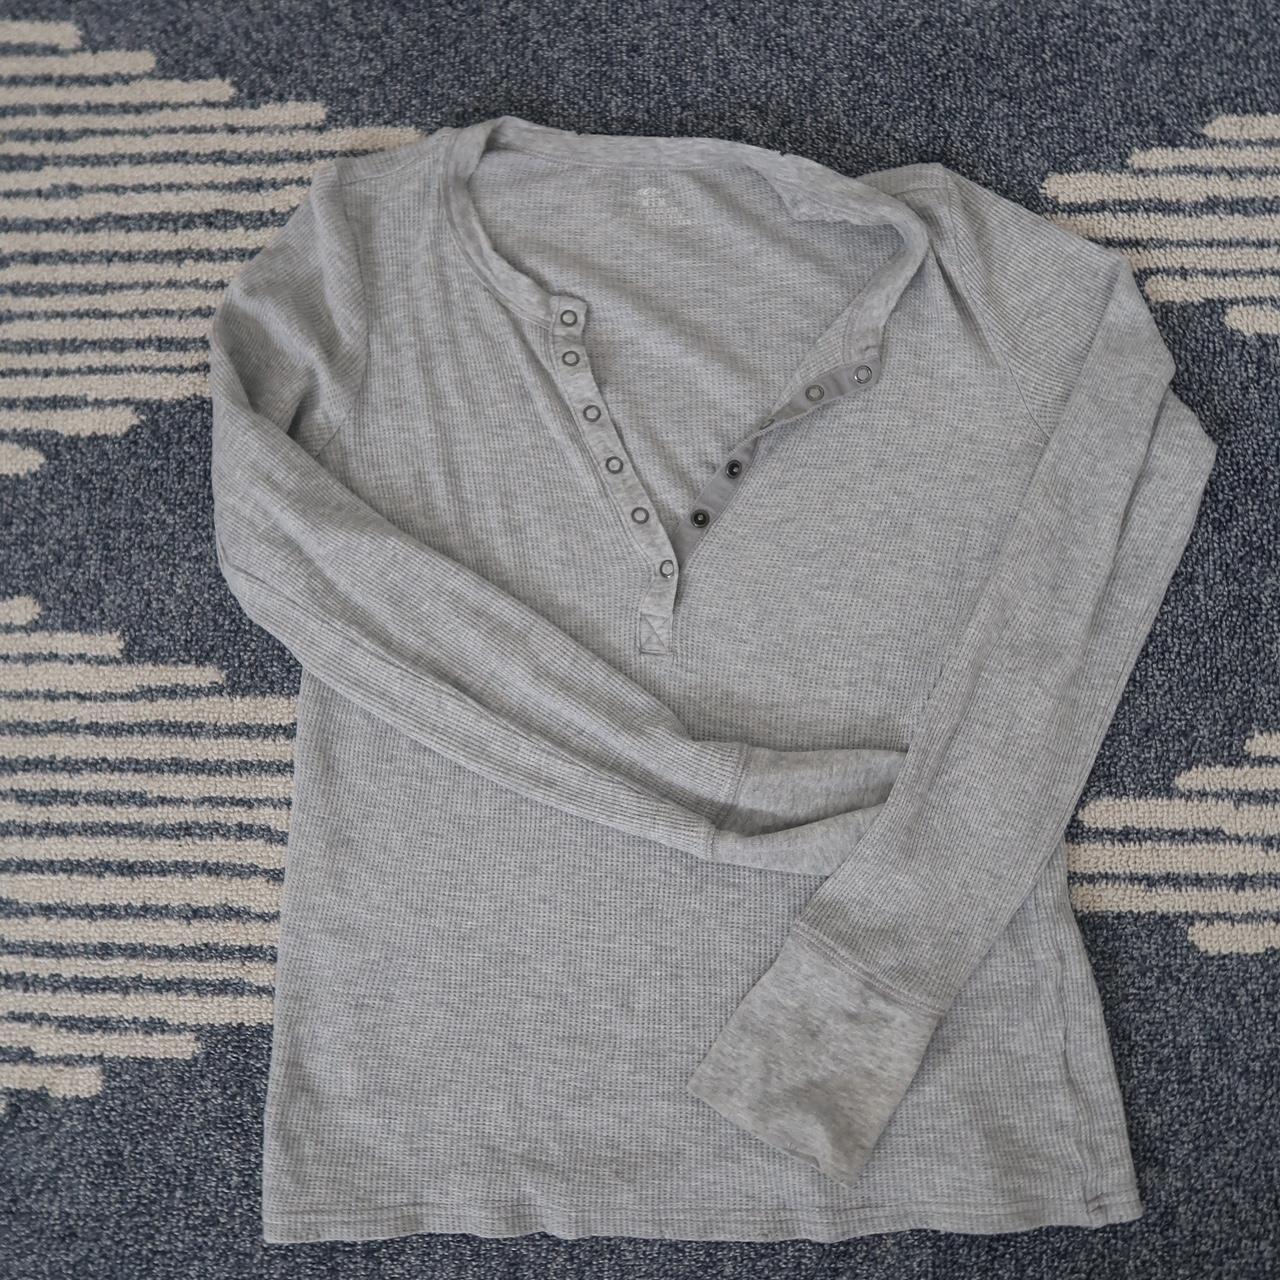 American Eagle Outfitters Women's Grey Shirt